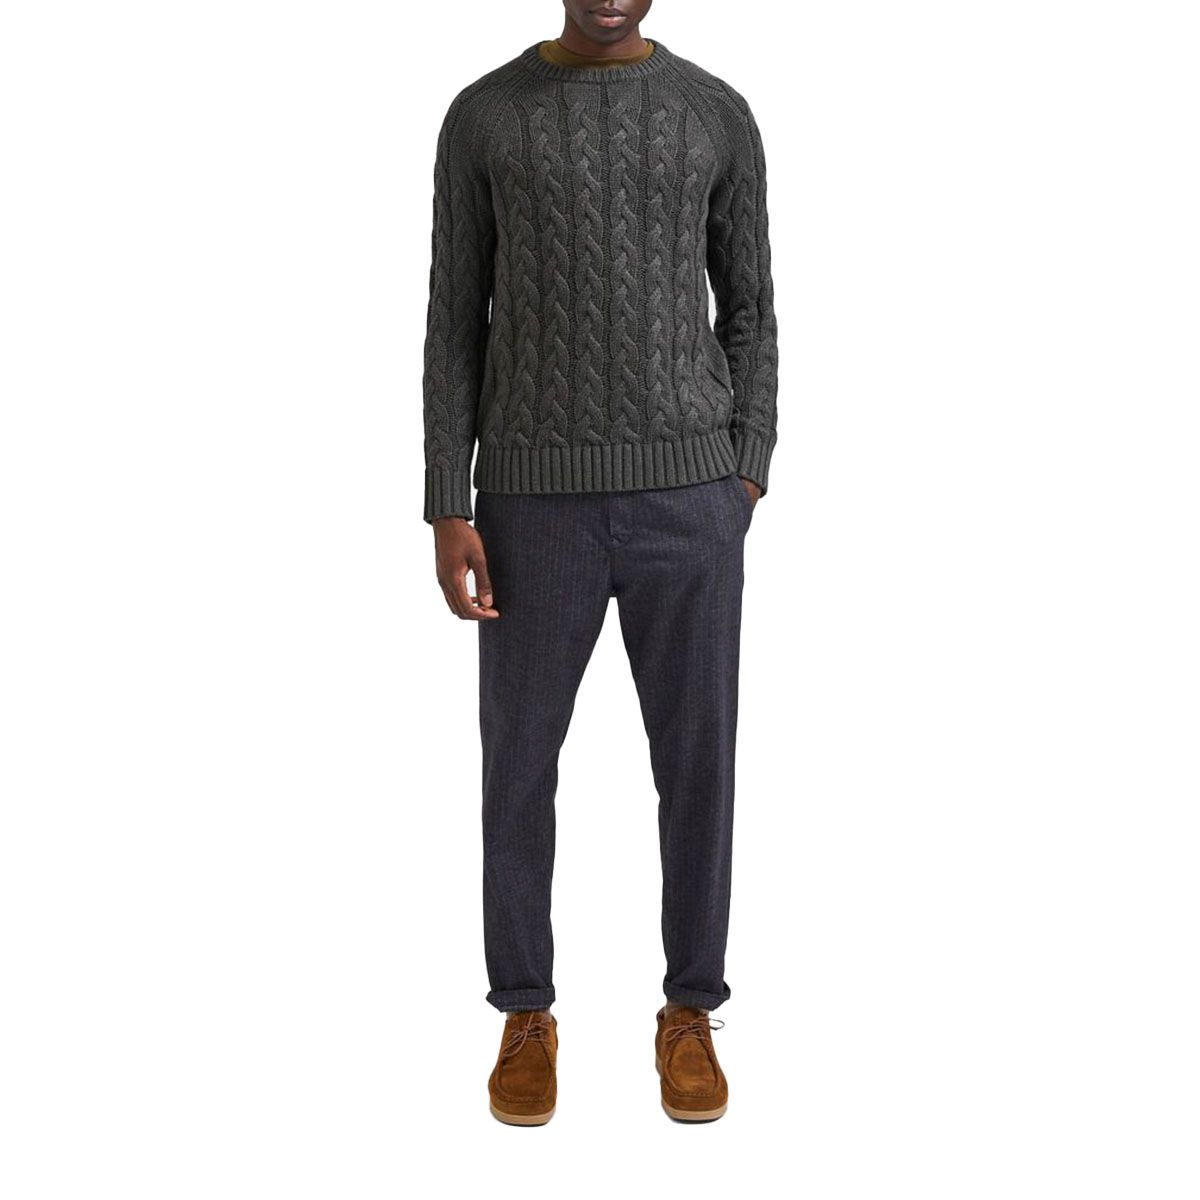 Grey Cable Knit Jumper